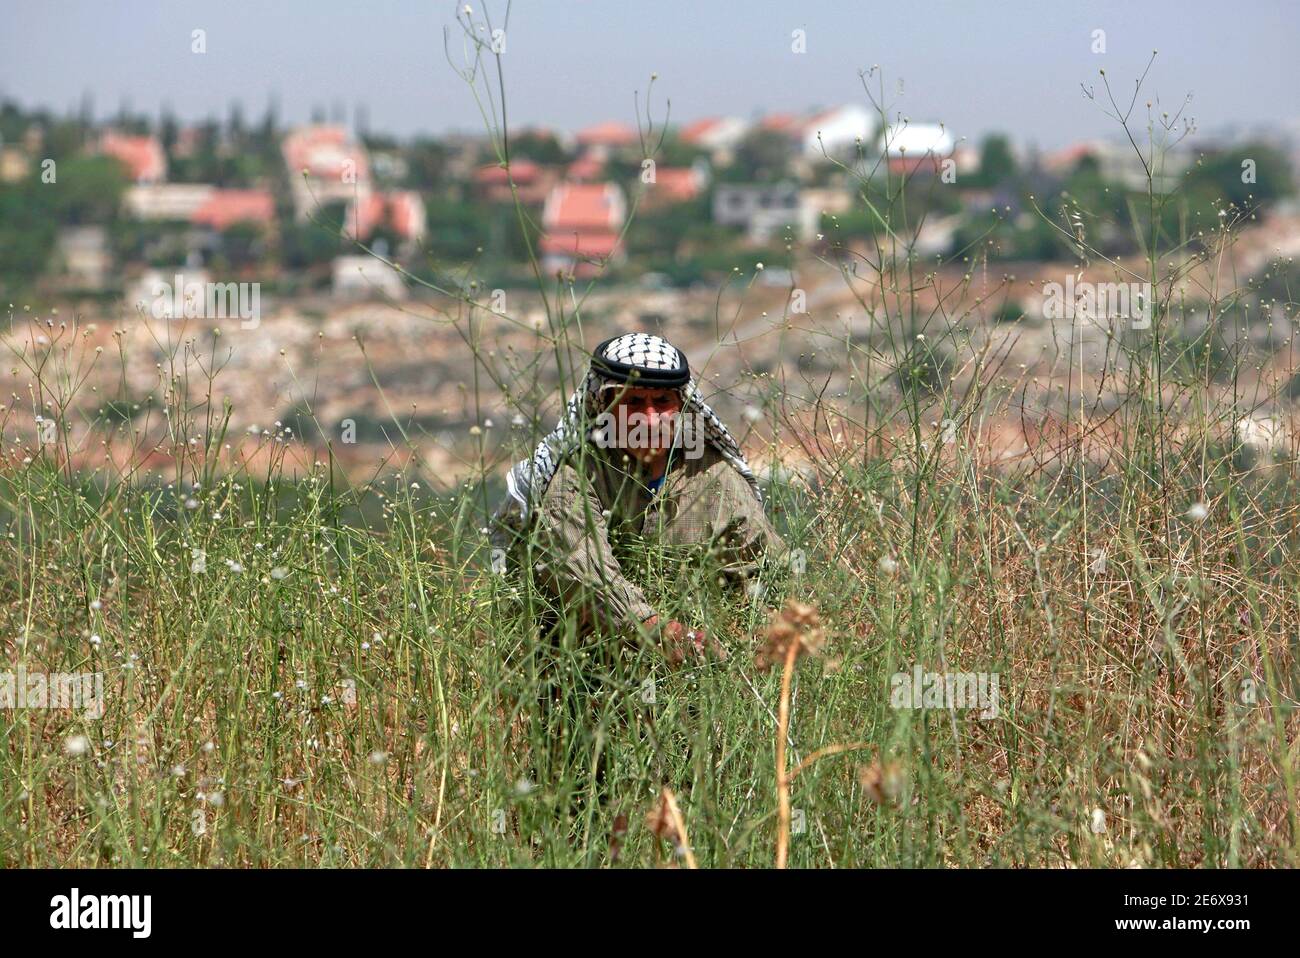 Palestinian Yousef Fawatme, 48, cuts weeds in a field in the West Bank village of Aboud, as the Jewish settlement of Beit Arye is seen in the background May 18, 2009. Israel's land barrier is slowly destroying the fabric of this Palestinian village of Christians and Muslims in the West Bank, residents say, setting a prime example of why the United States wants settlements to stop. To match feature ISRAEL-PALESTINIANS/FENCE   REUTERS/Ammar Awad (WEST BANK POLITICS CONFLICT) Stock Photo